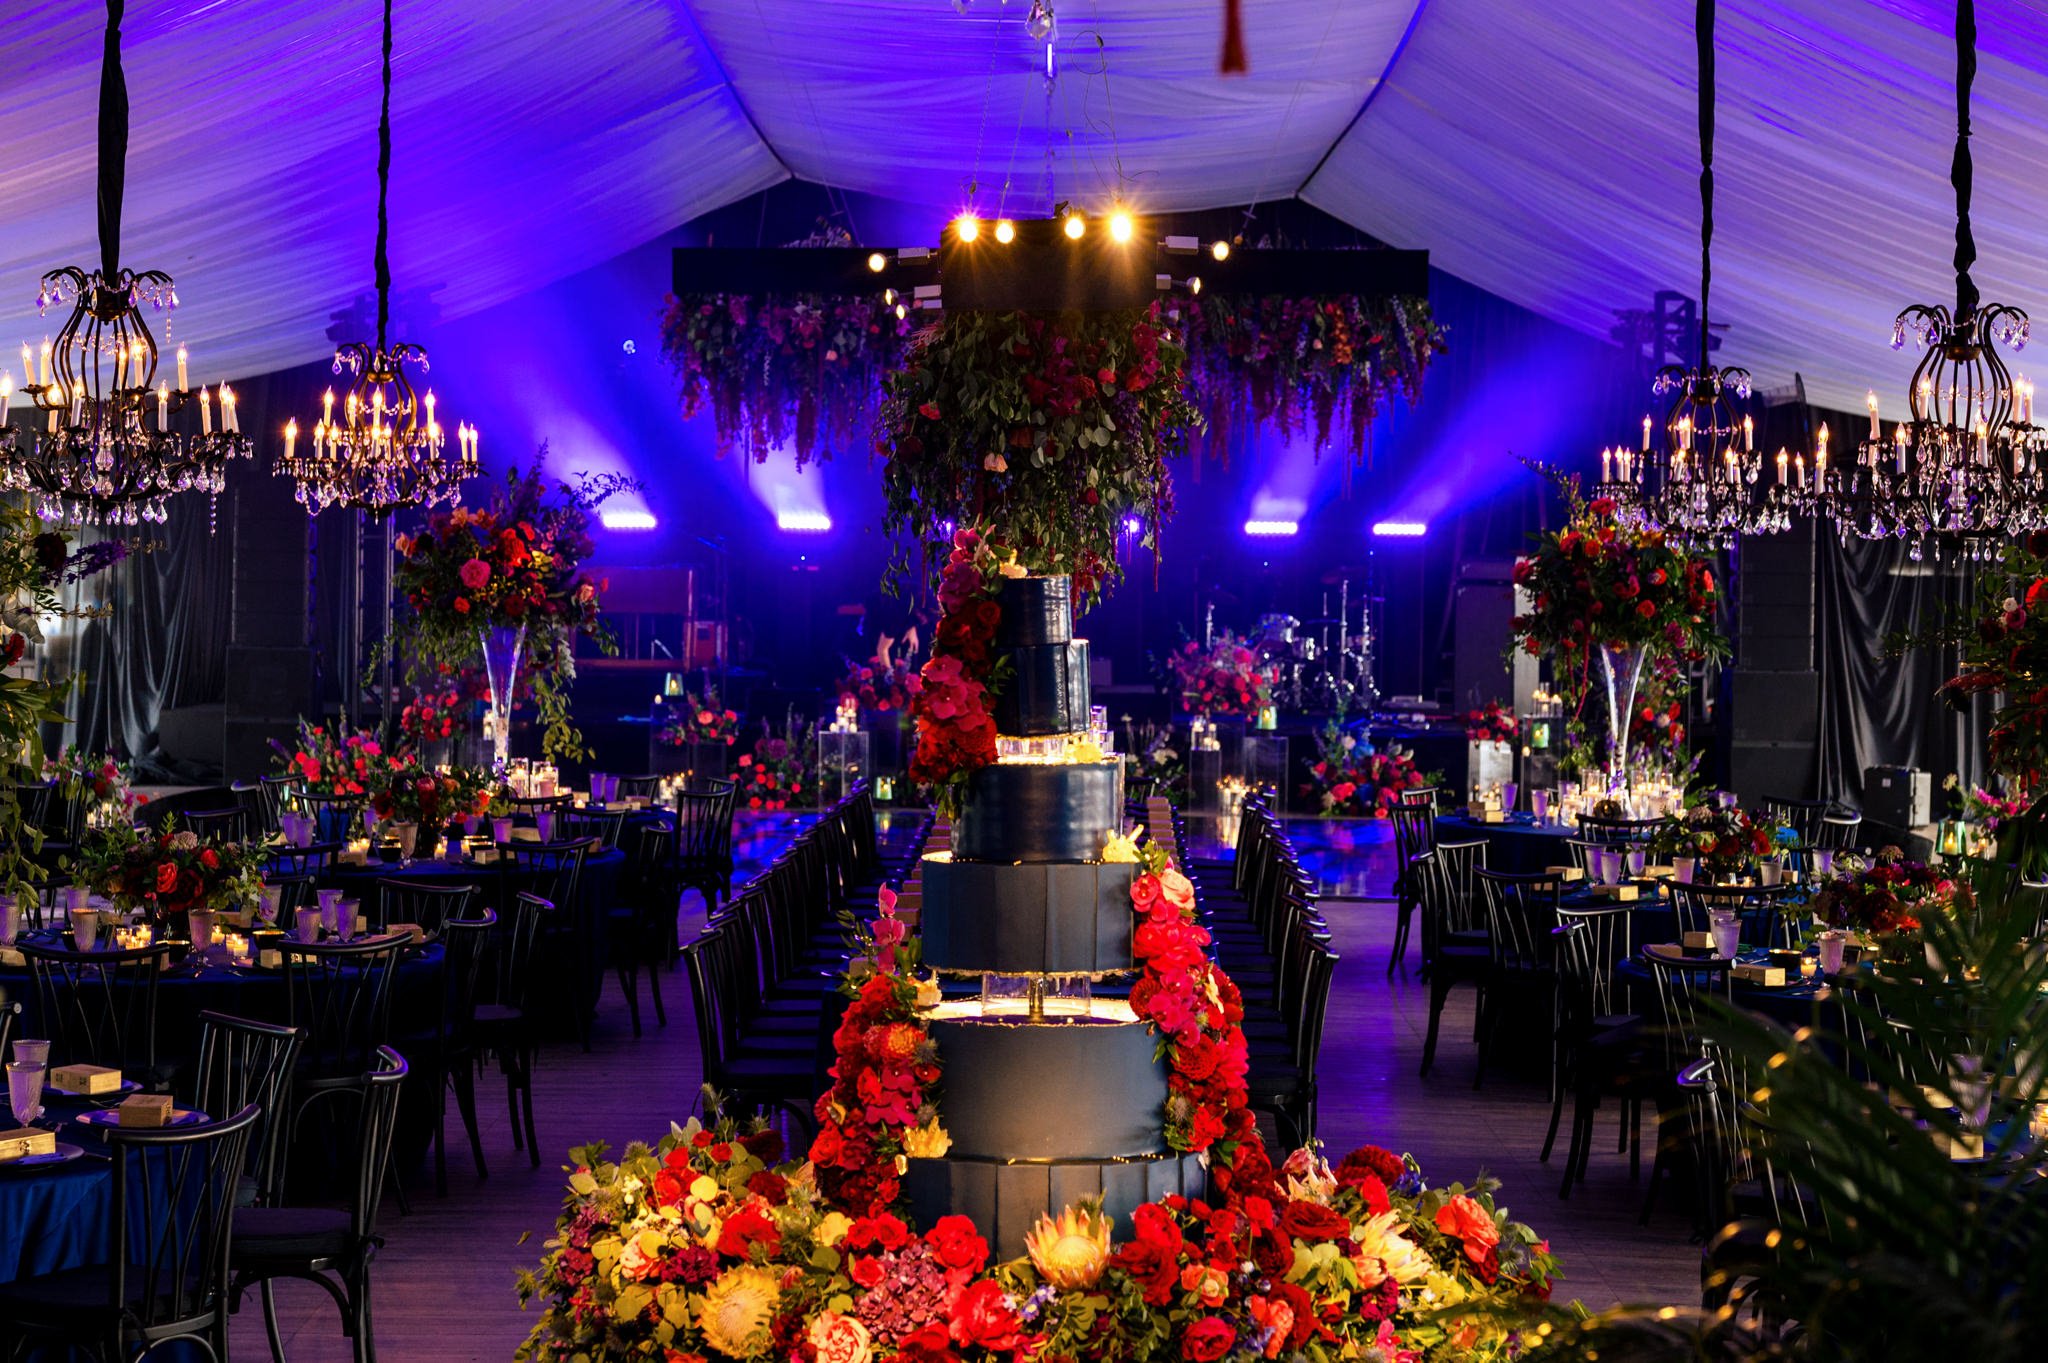 A spacious tent set up on the south terrace with tables and chairs, perfect for a glamorous Biltmore Estate wedding